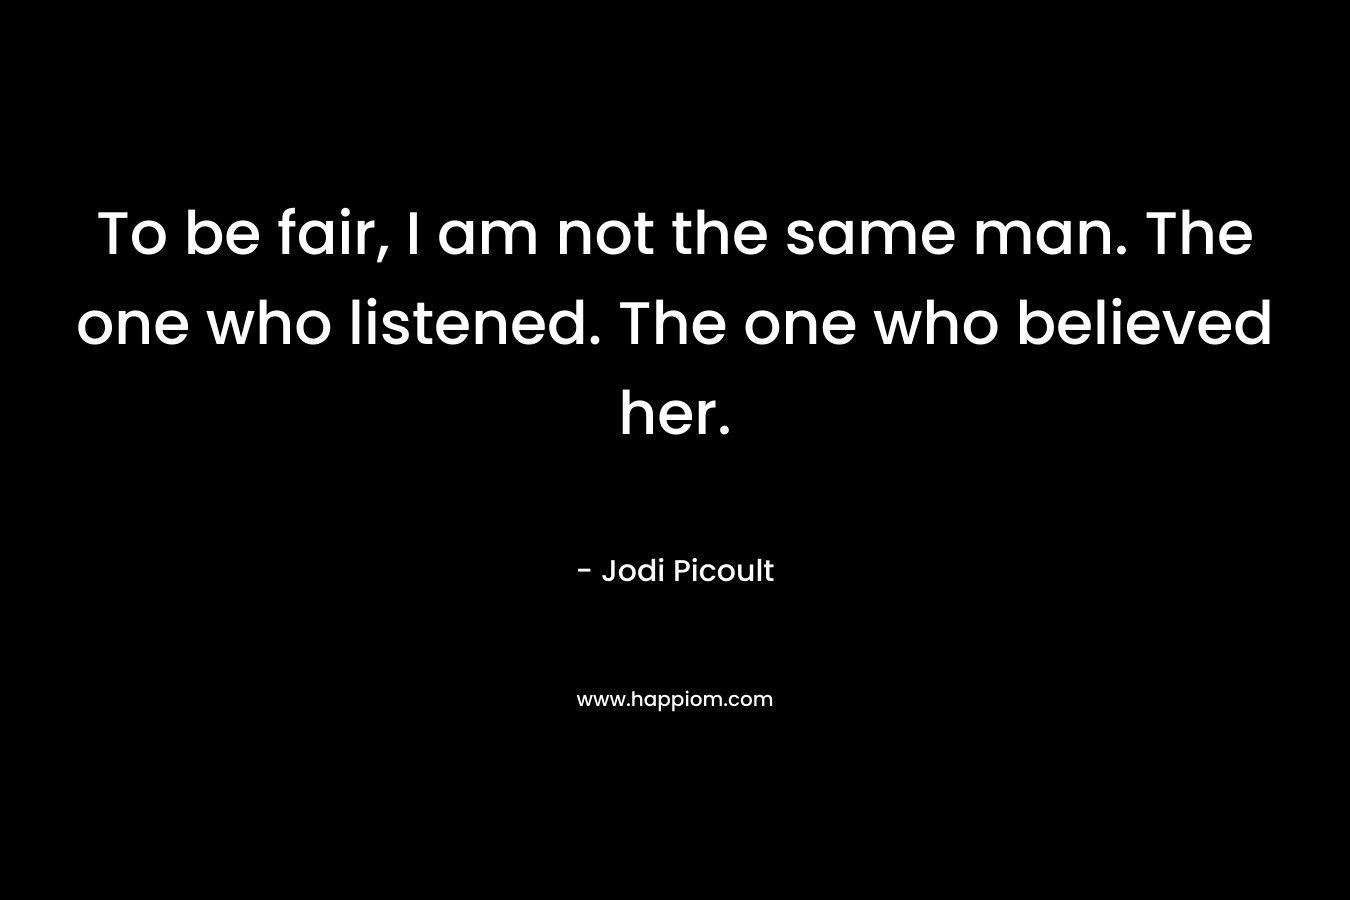 To be fair, I am not the same man. The one who listened. The one who believed her.